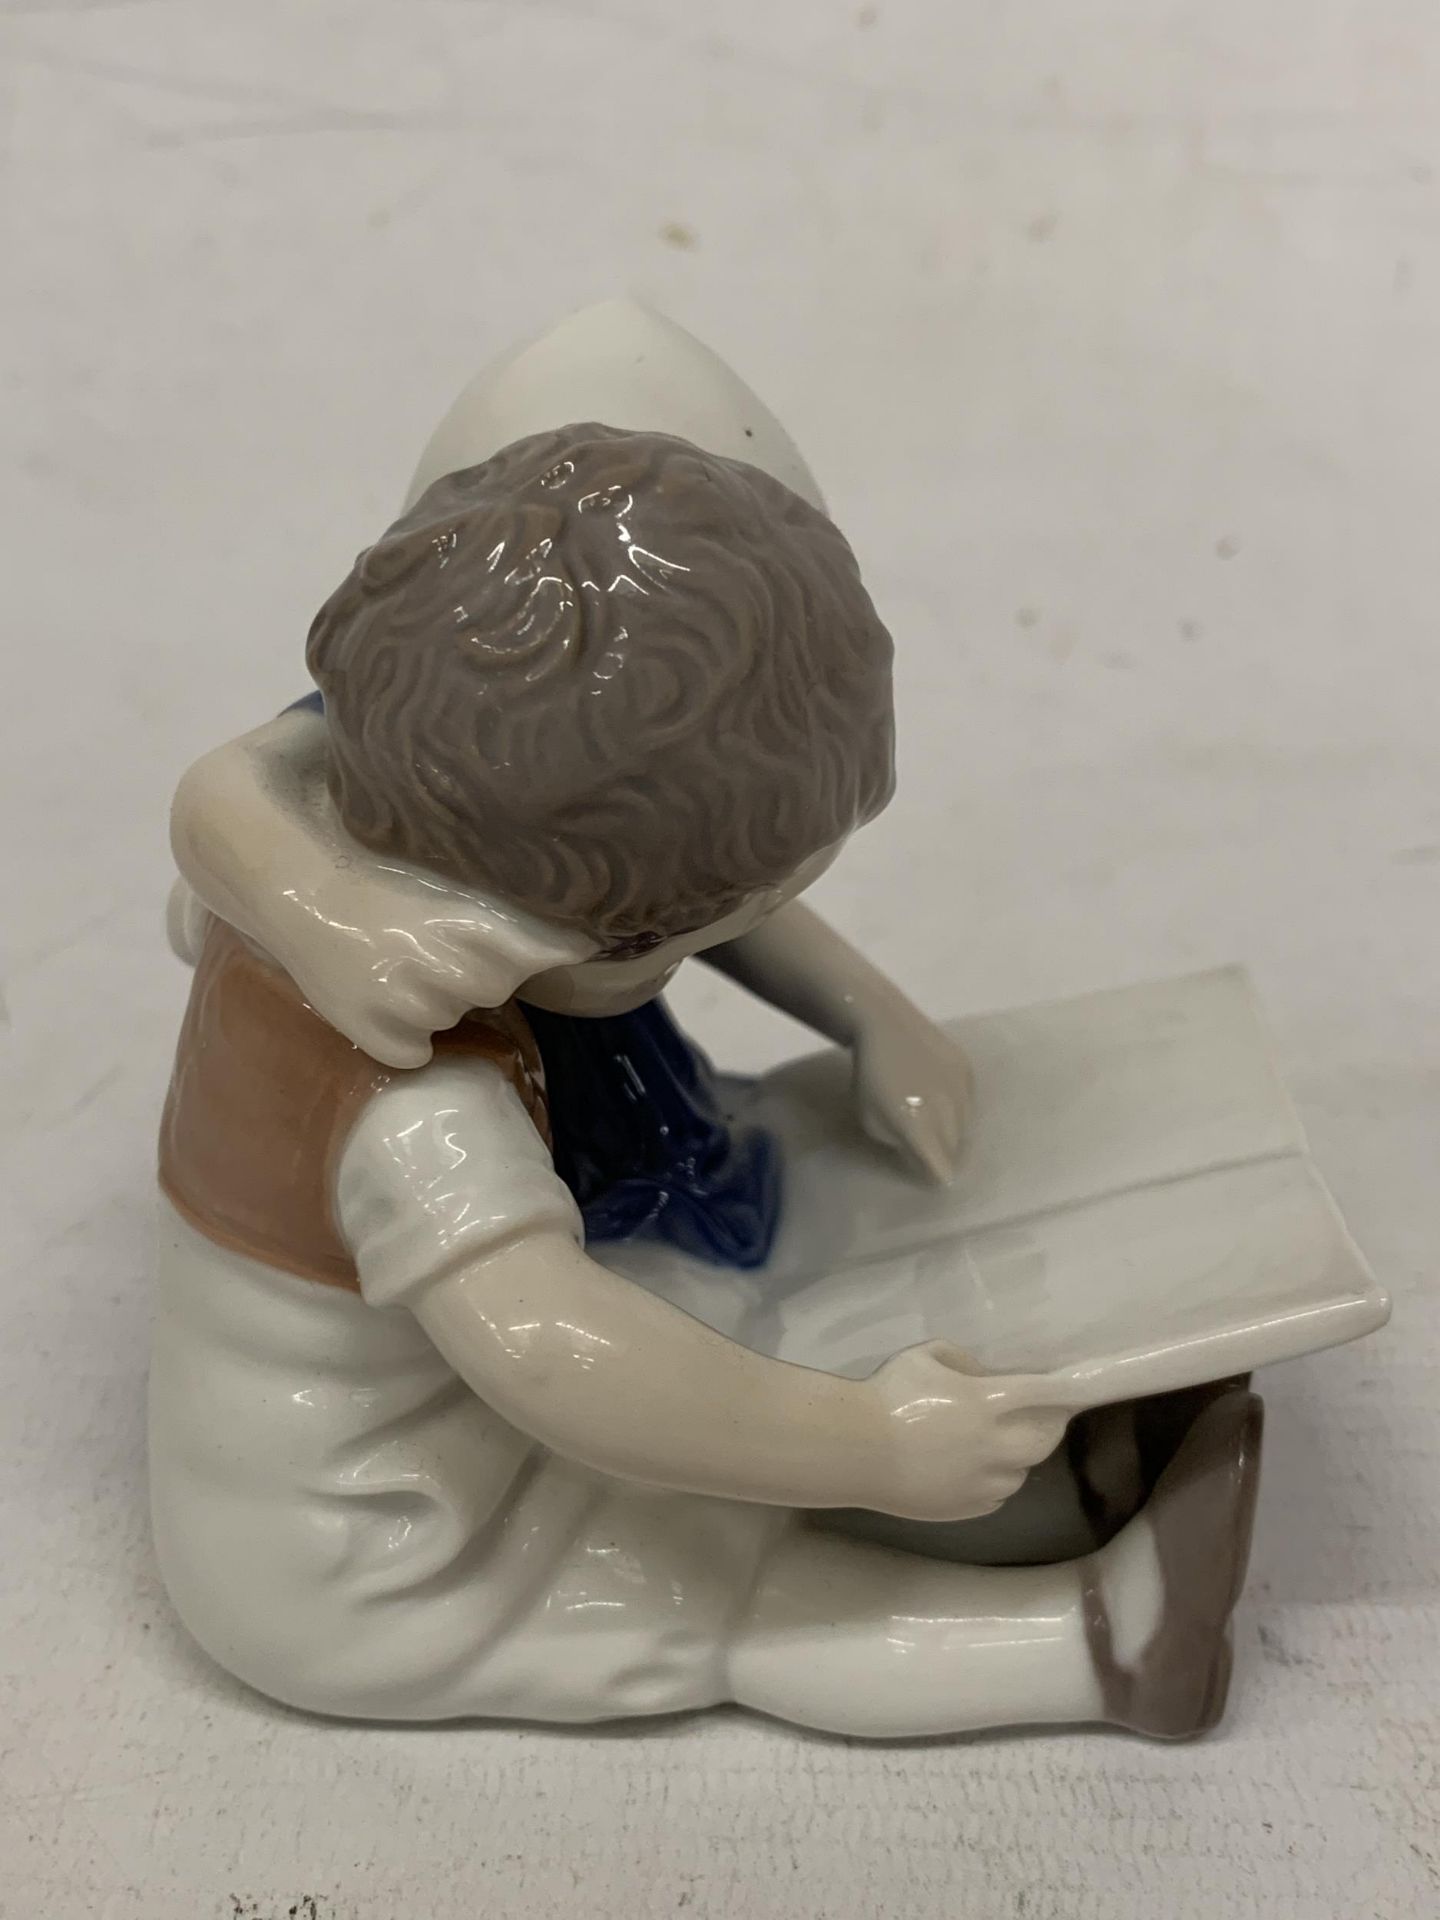 A BING AND GRONDAHL FIGURE OF CHILDREN READING A BOOK - Image 2 of 5